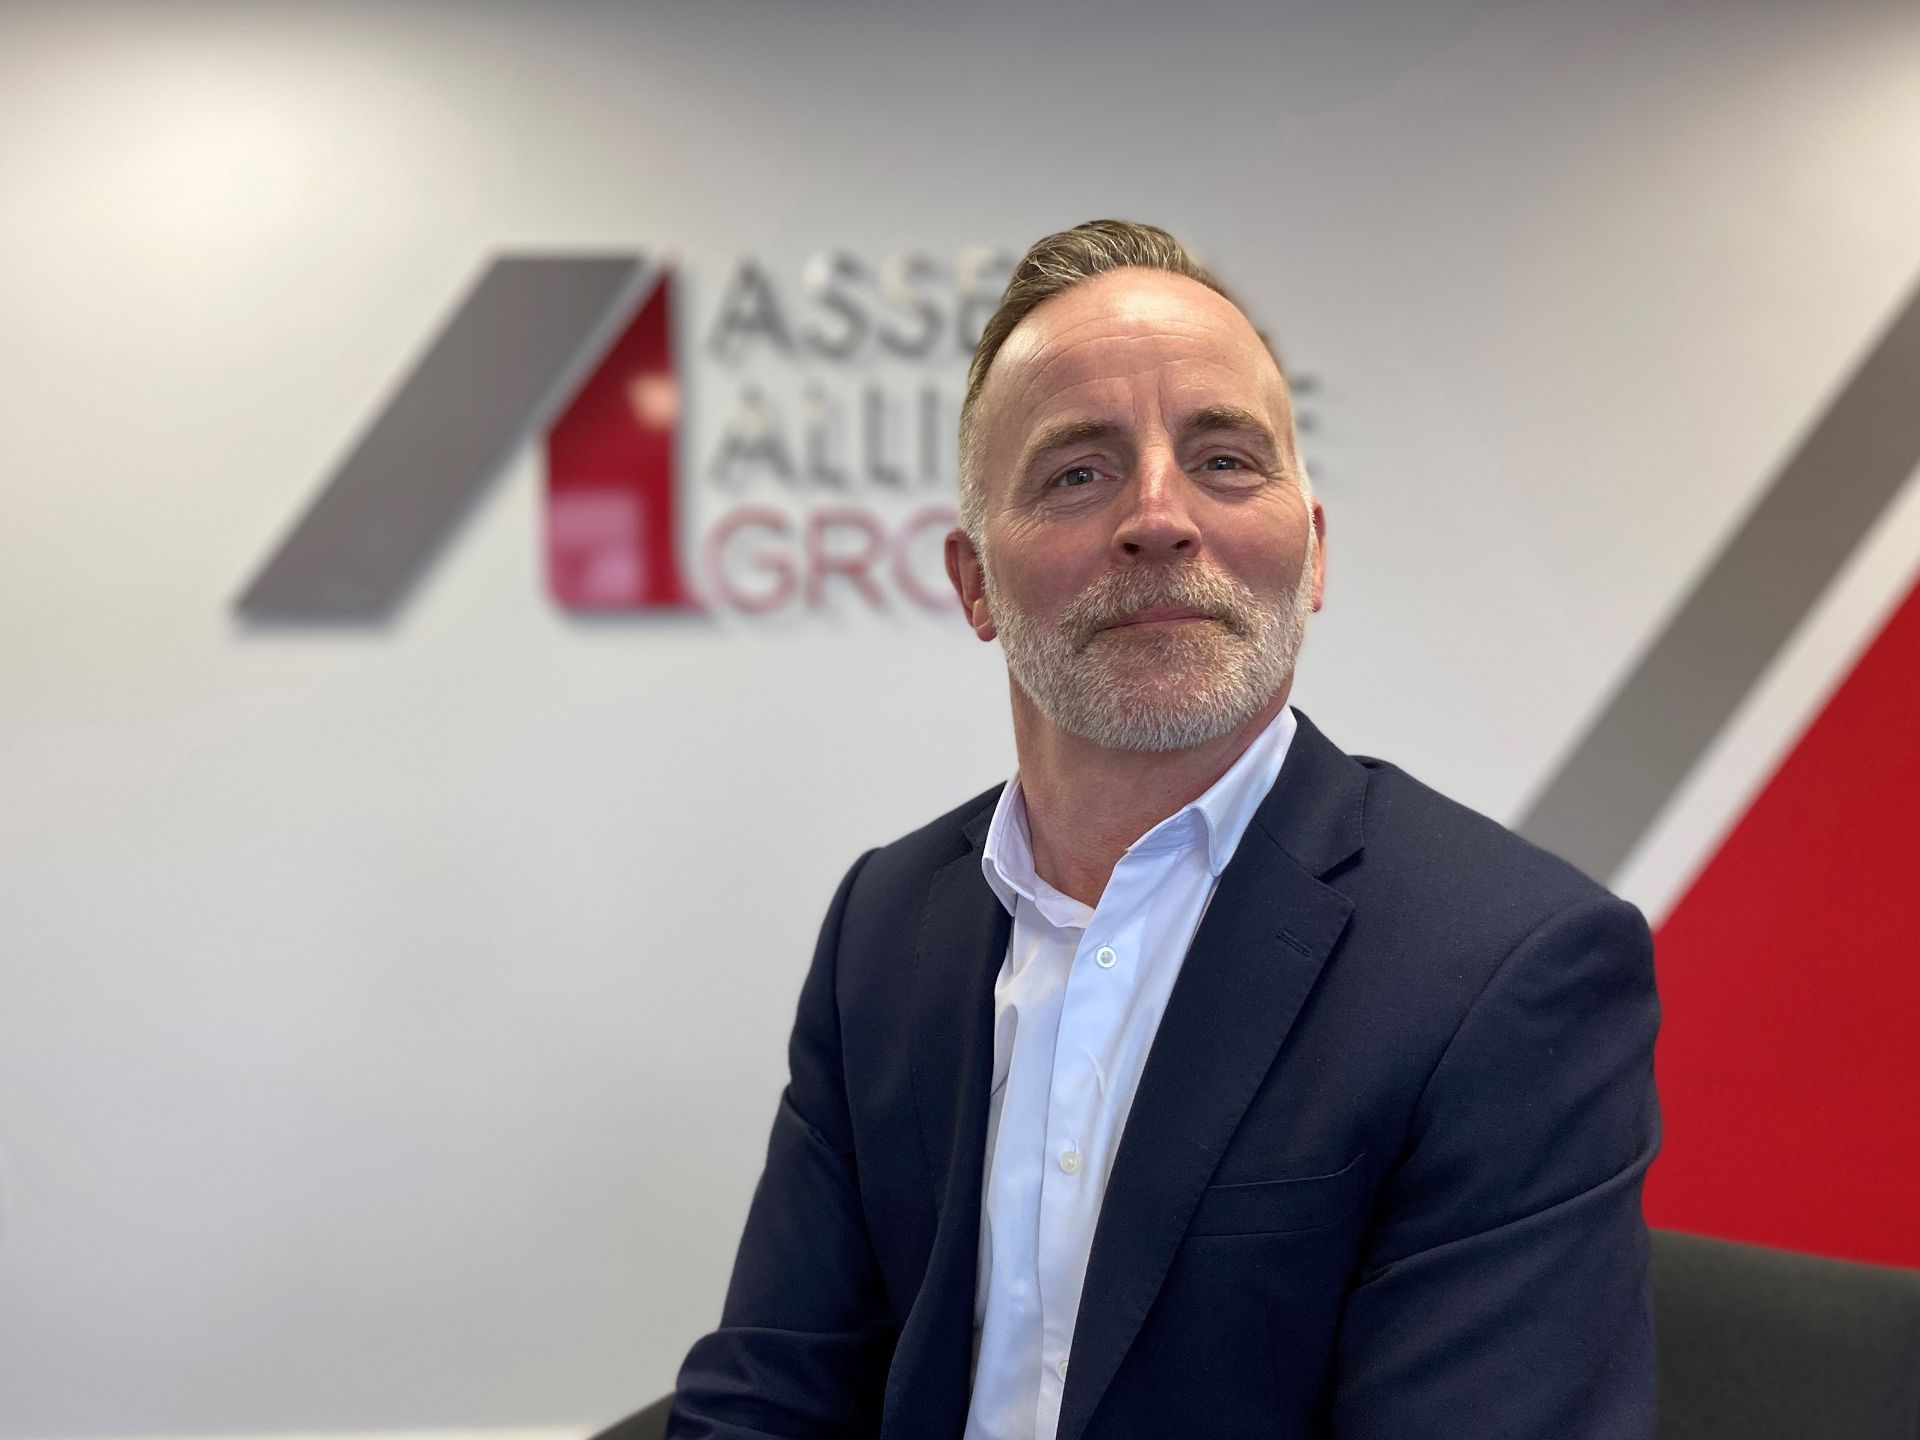 Bellis takes up new role at Asset Alliance Group